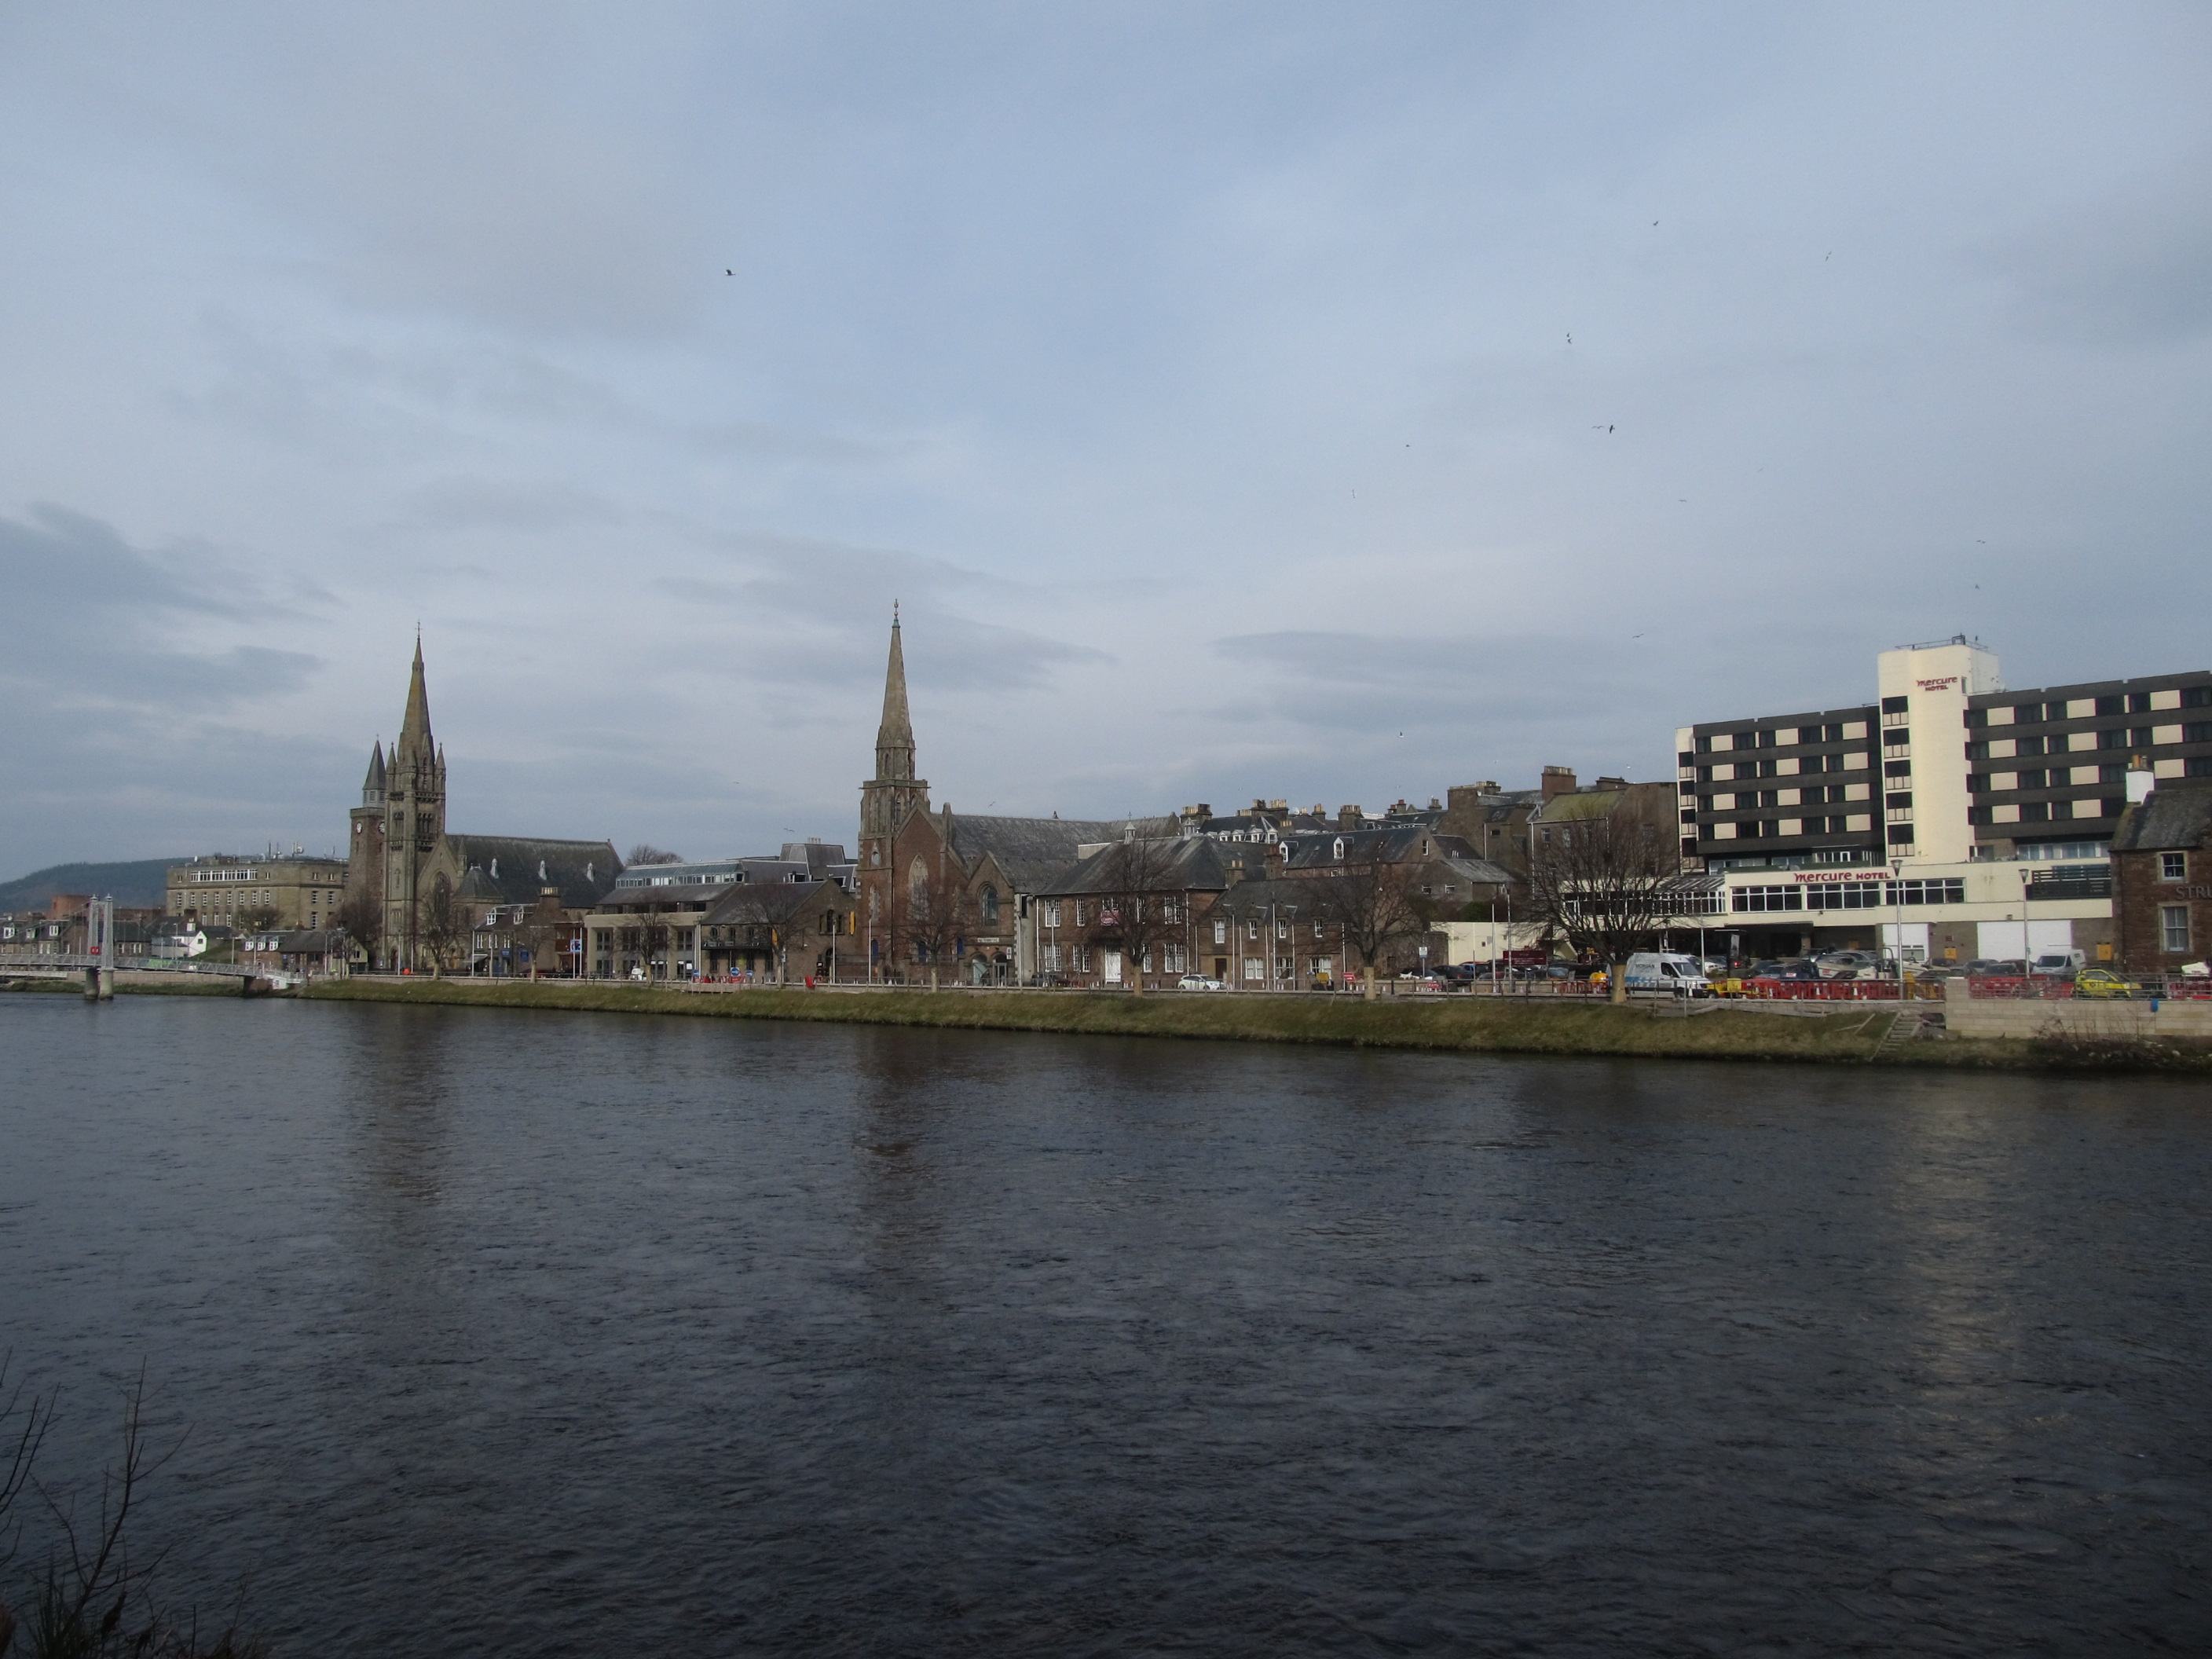 Inverness downtown seen from the south